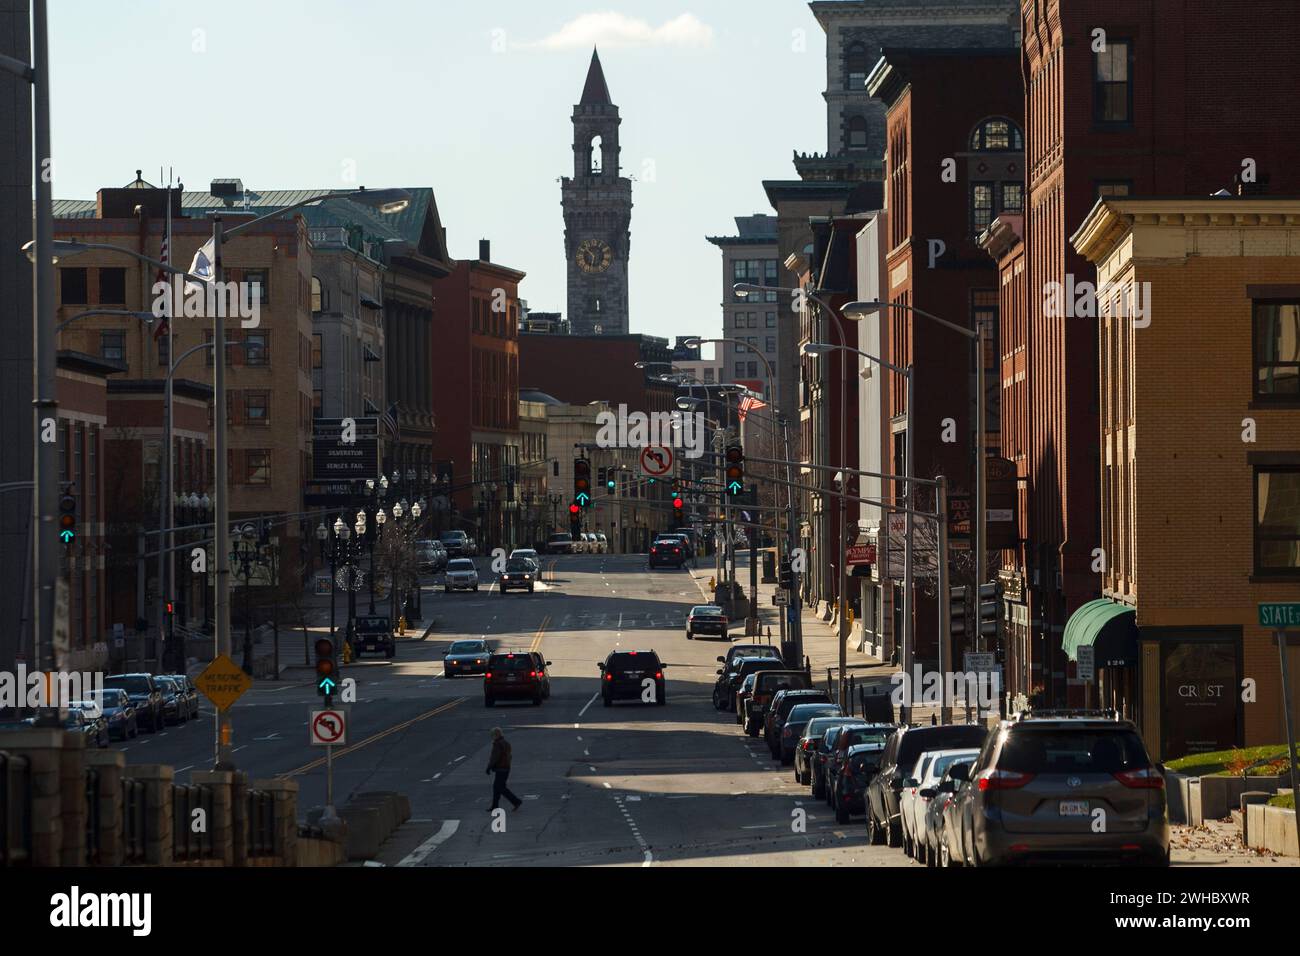 A view down Main Street in Worcester, Massachusetts, USA the second largest city in New England. Stock Photo